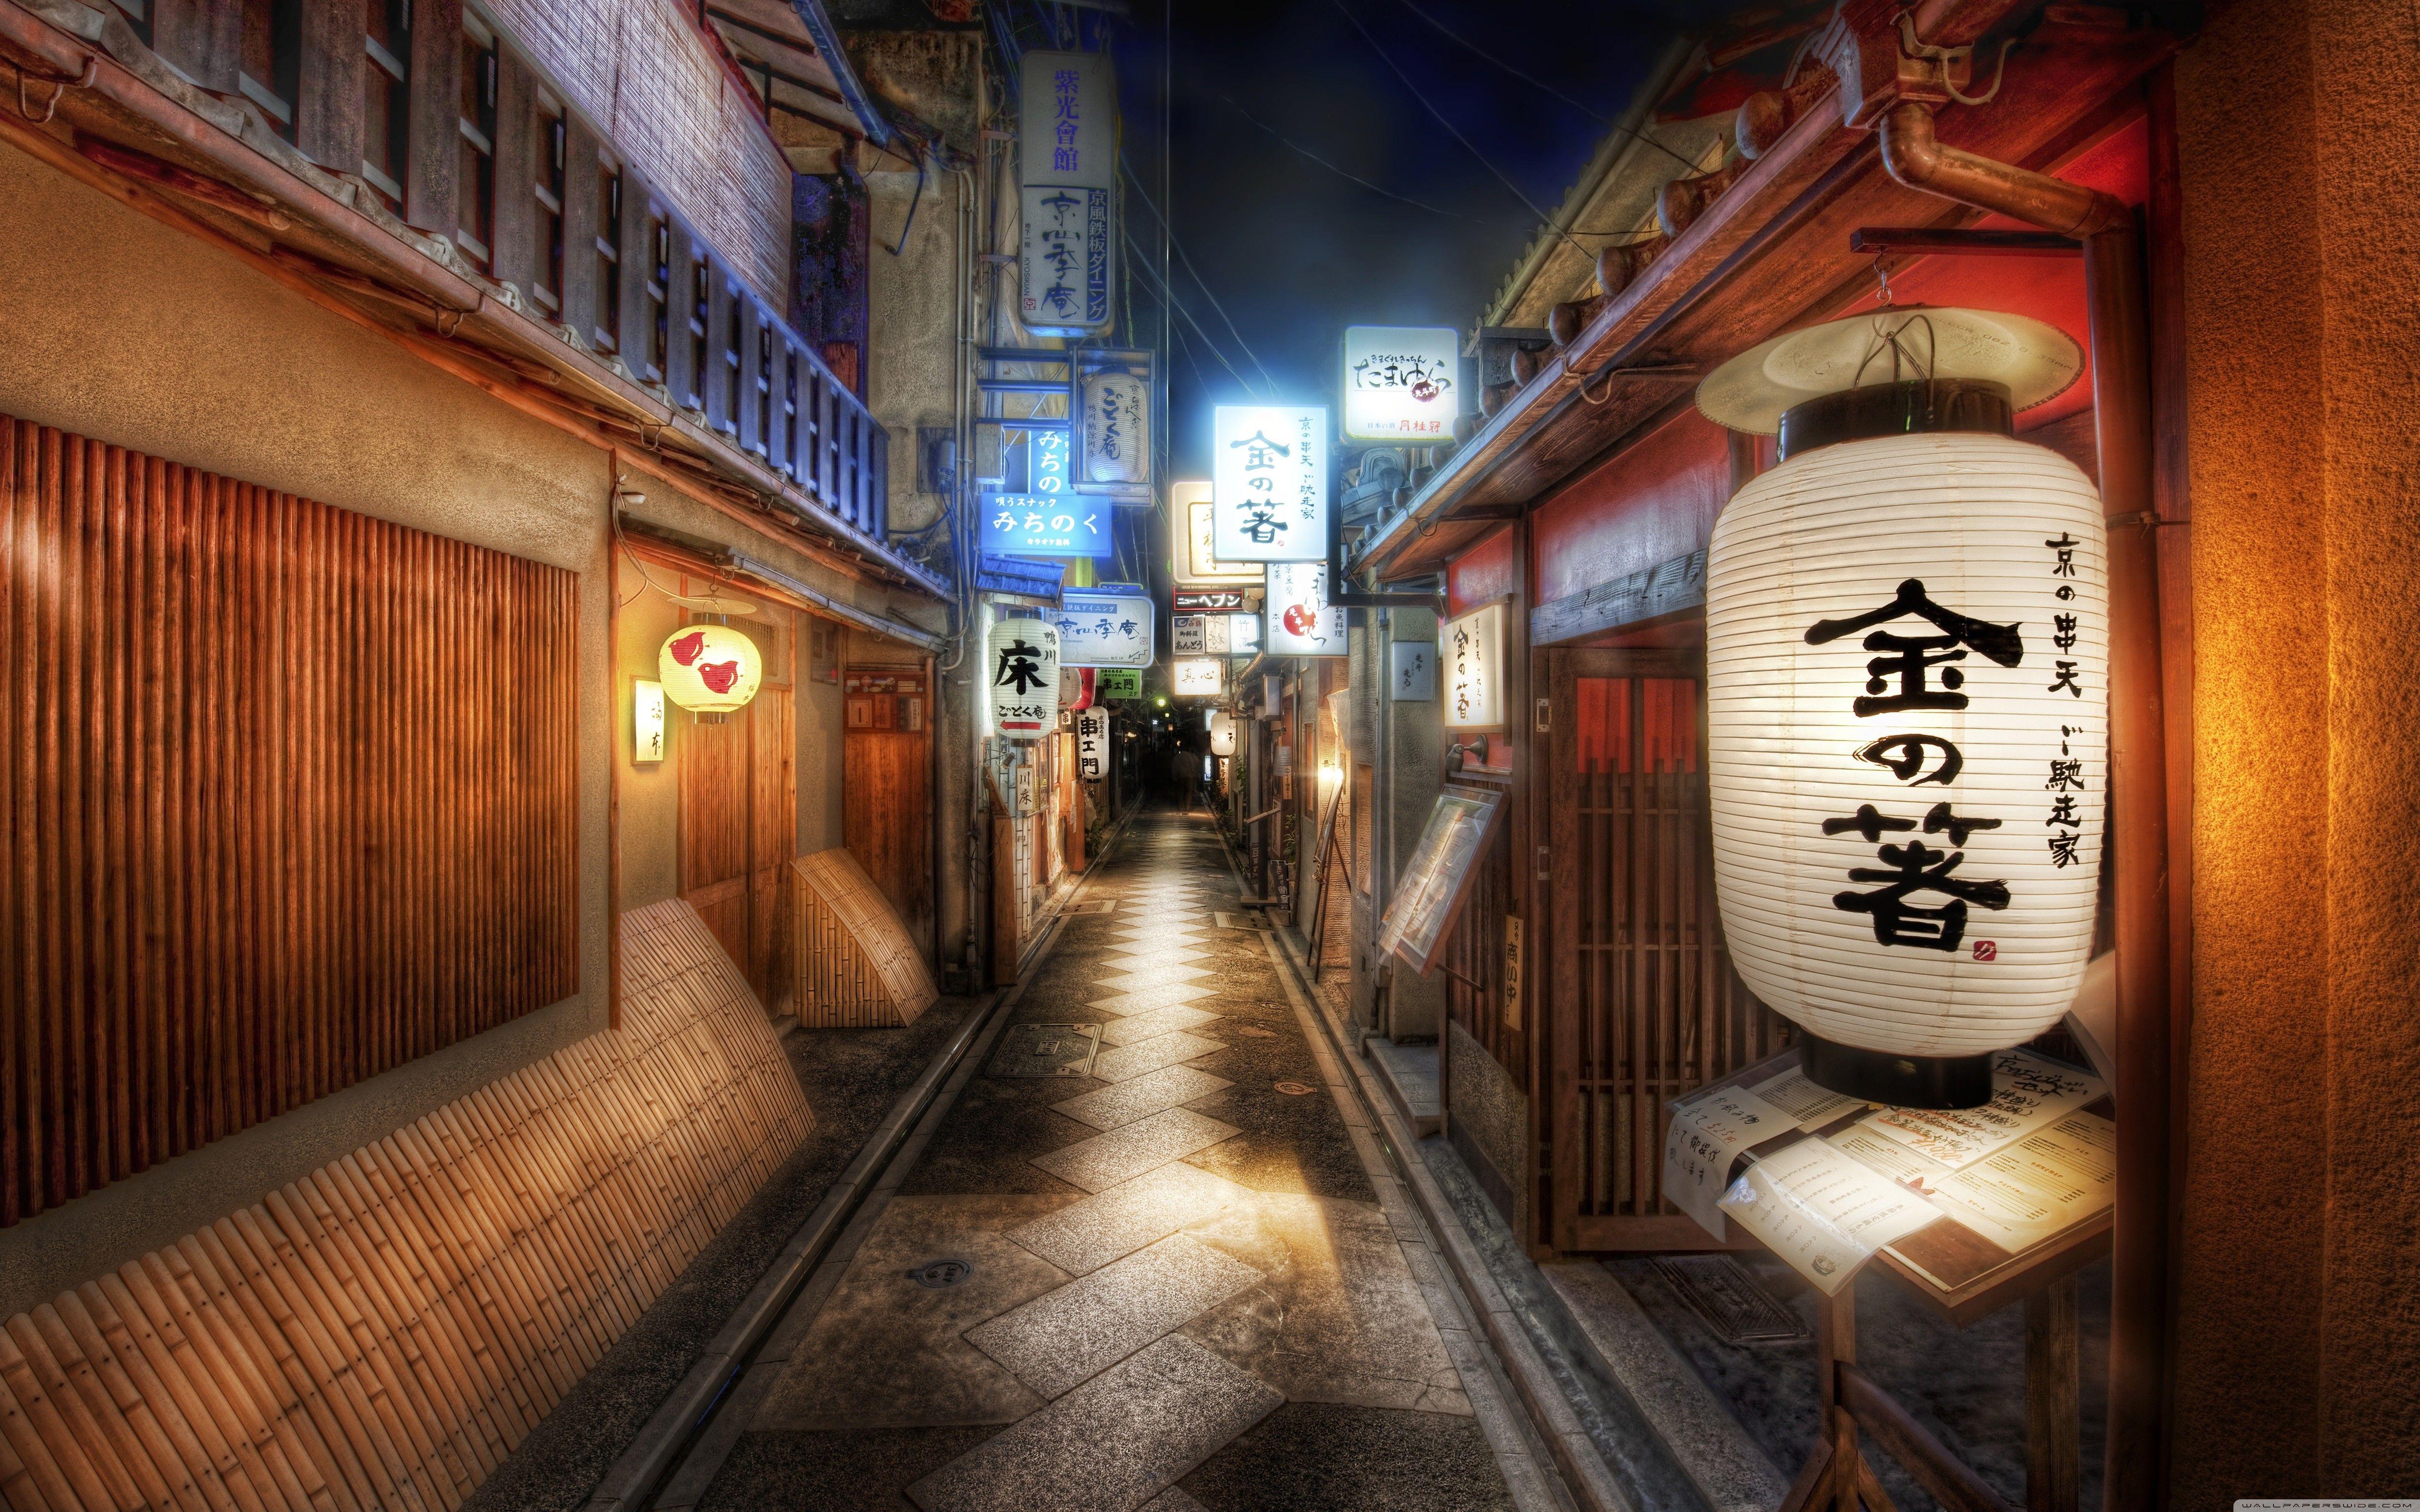 City Wallpaper: Japan City Wallpaper Image with High Definition